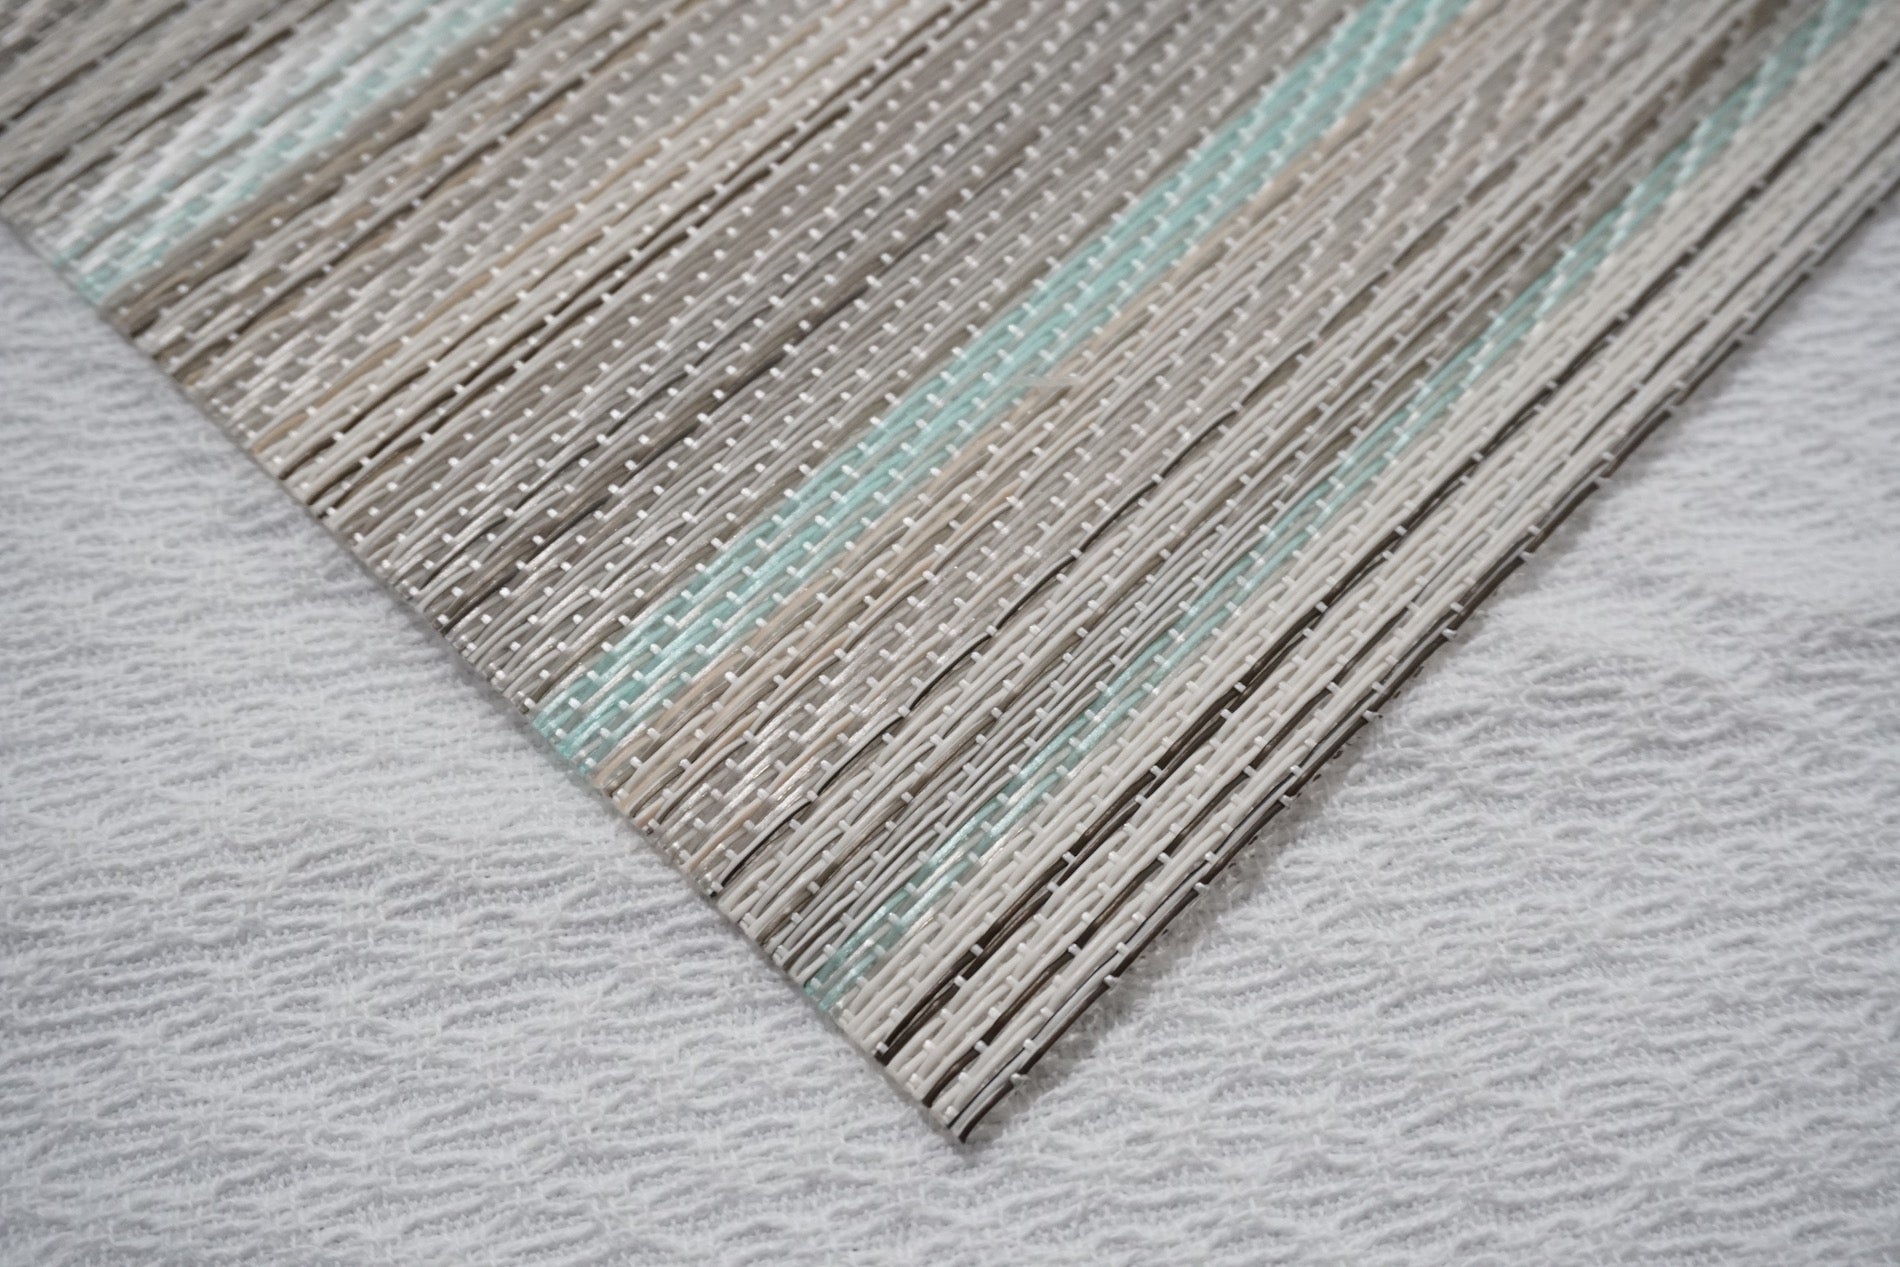 Dainty Home Multistripes Woven Textilene Crossweave With Textured Geometric Stripe Pattern Reversible 15" x 15" Square Placemats